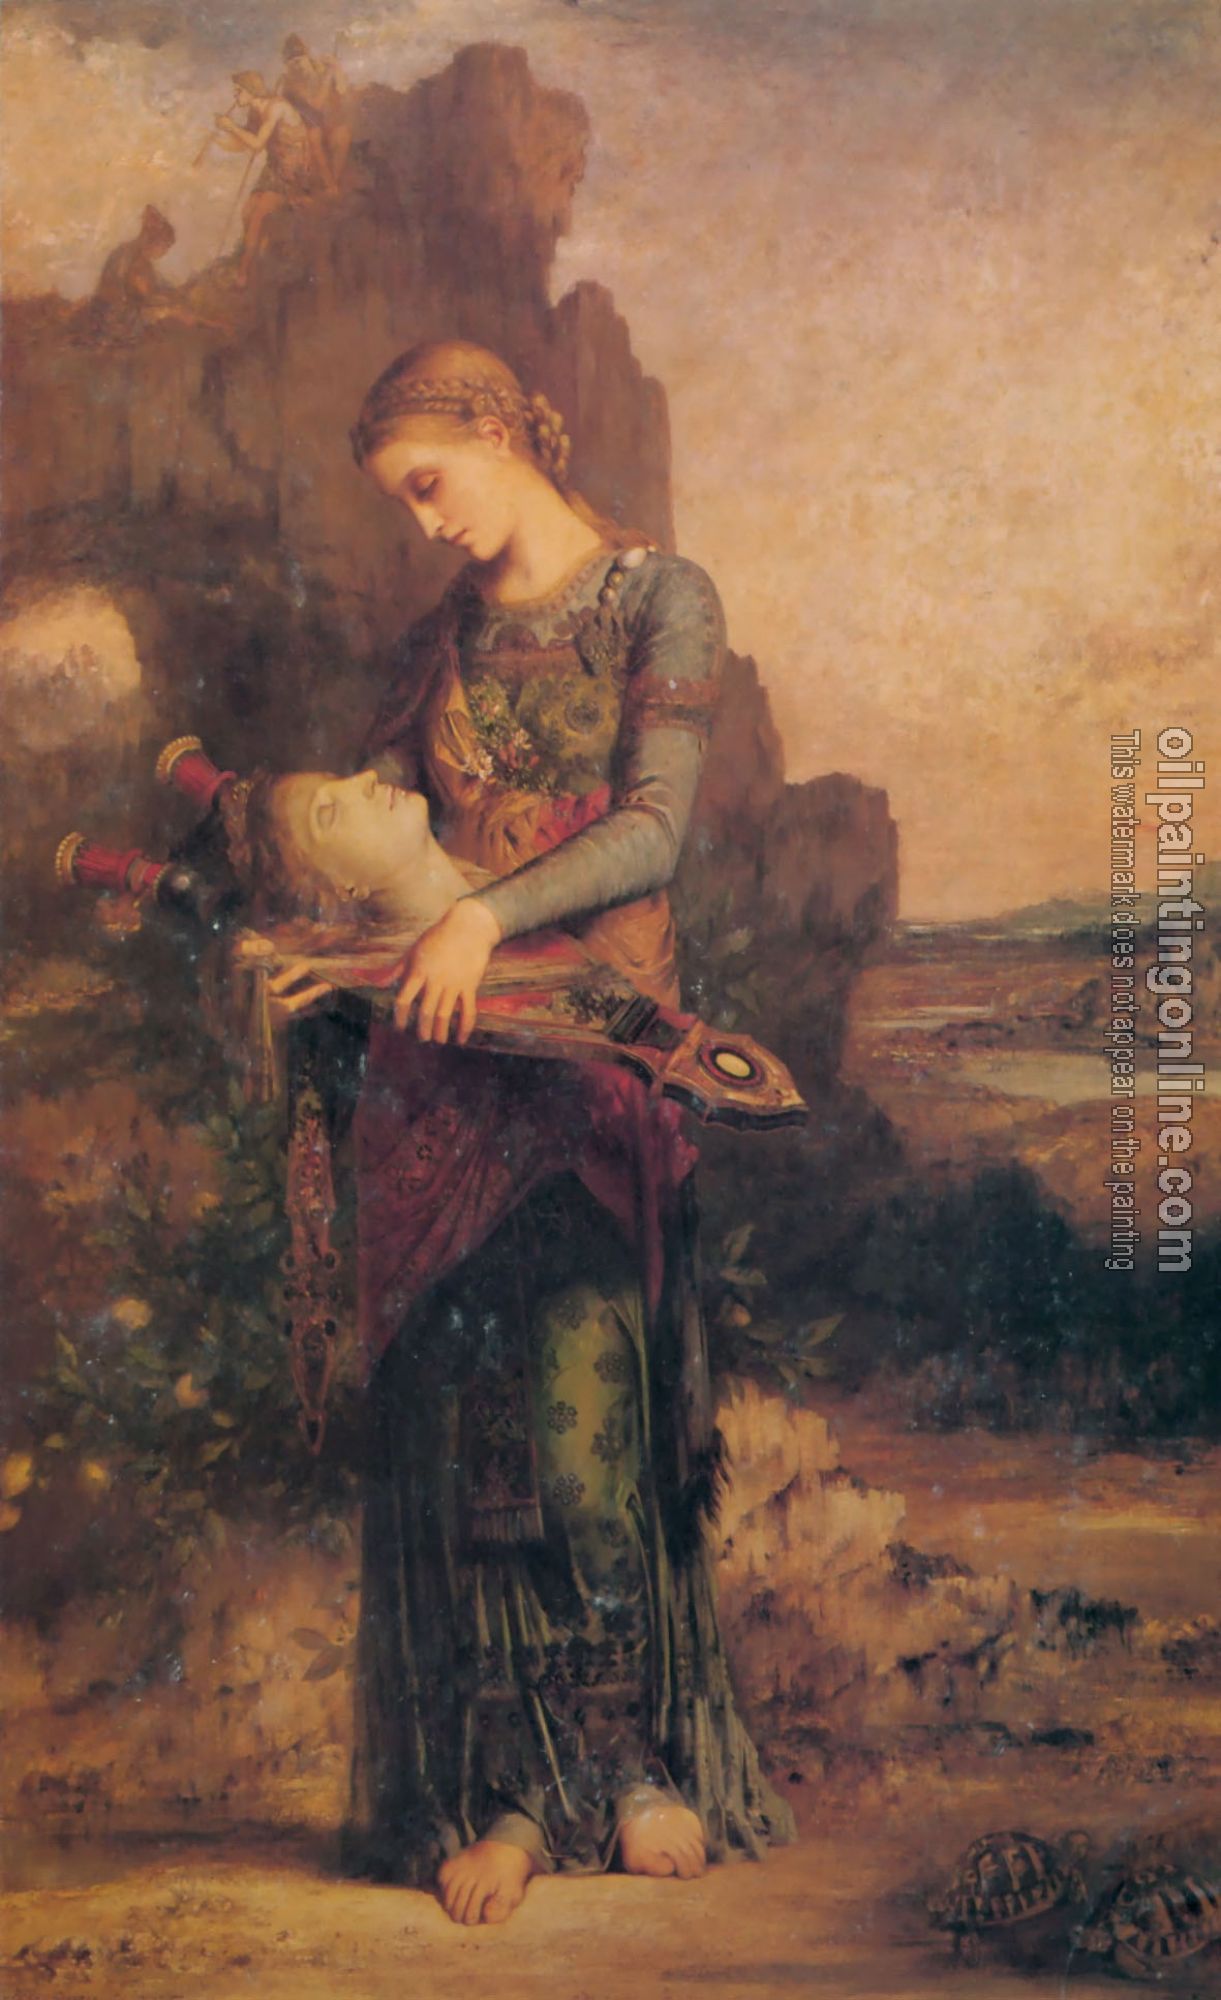 Moreau, Gustave - Thracian Girl carrying the Head of Orpheus on his Lyre